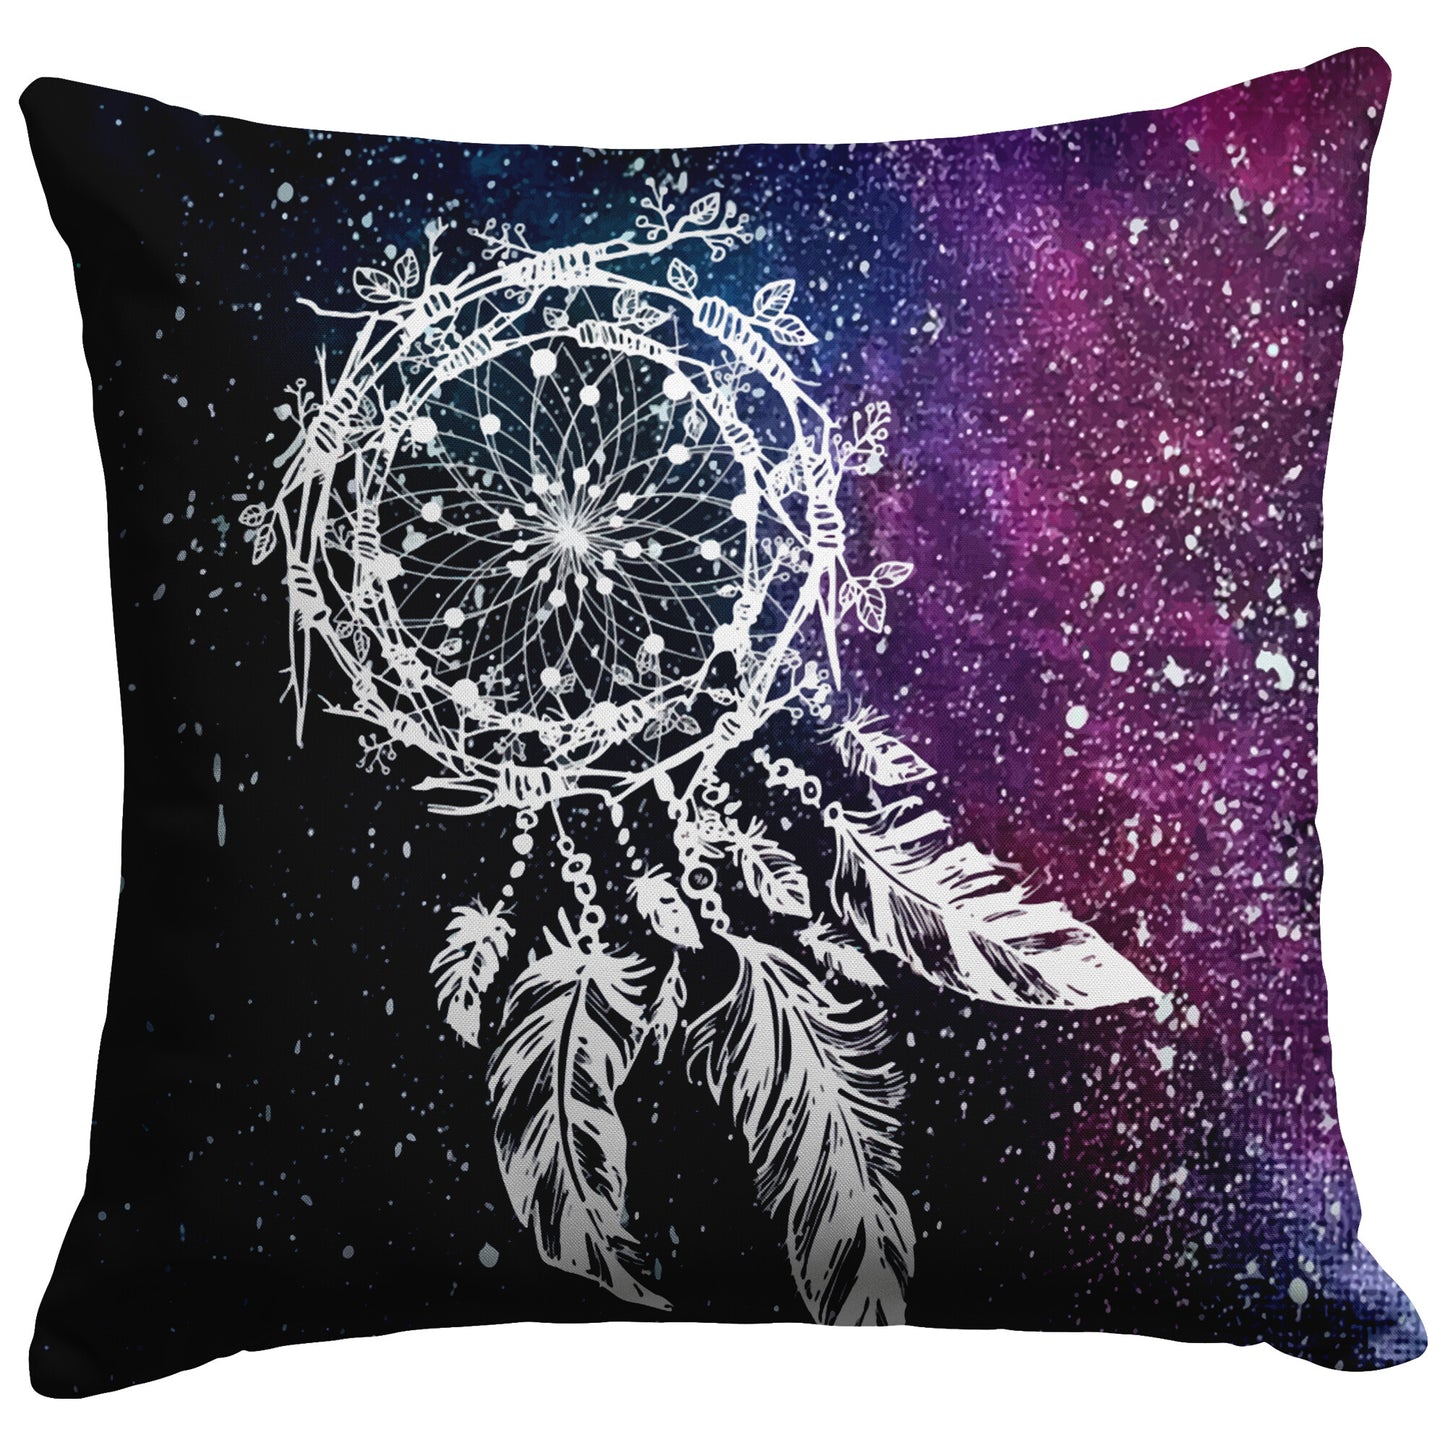 Dream Catcher Pillows And Covers